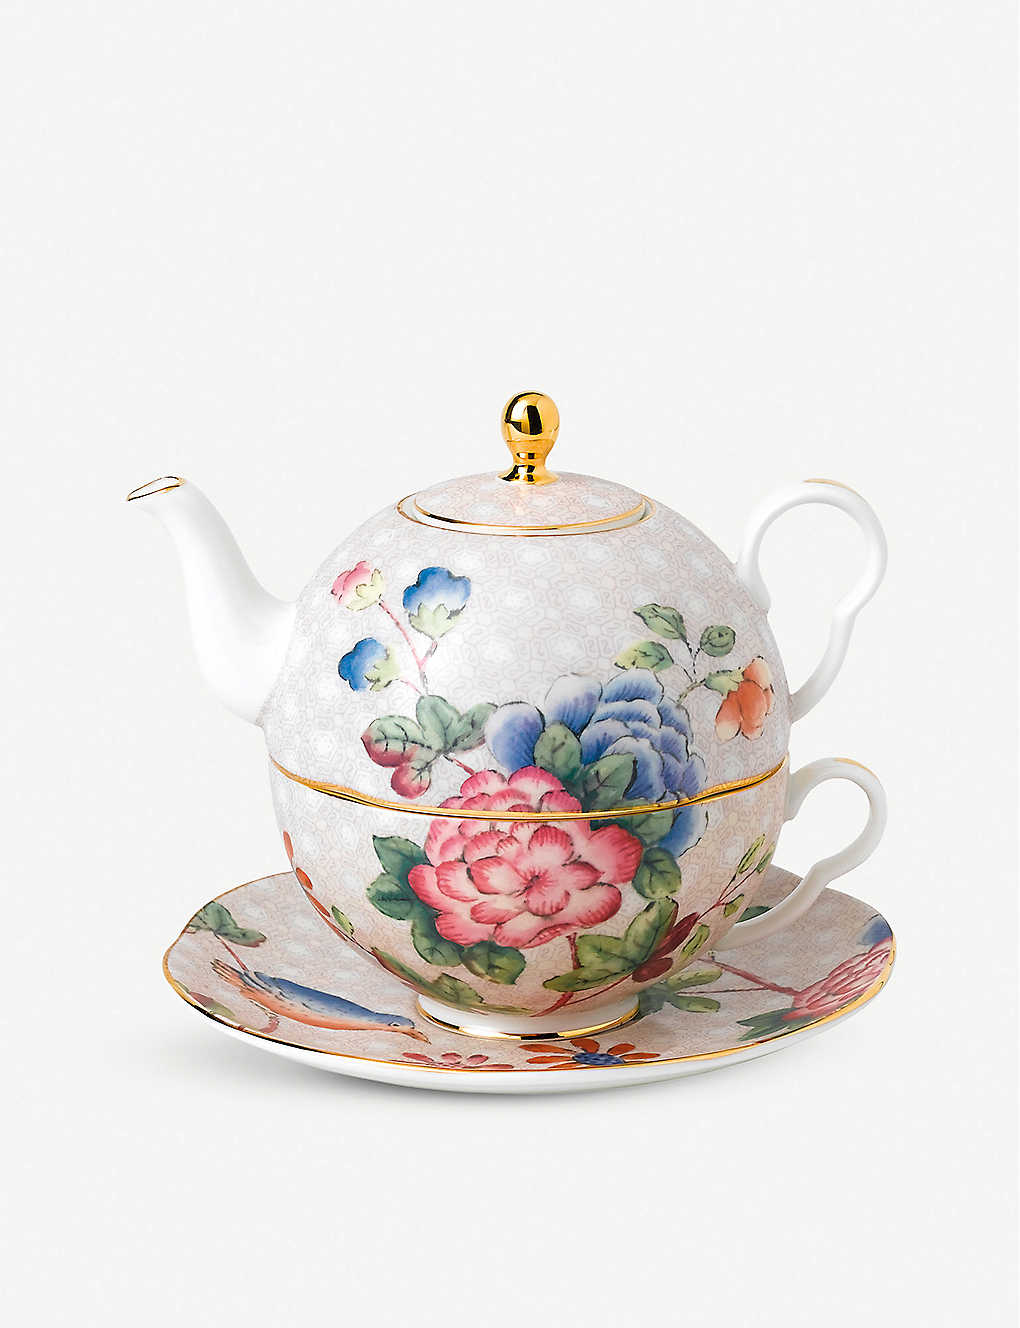 Wedgwood Cuckoo 24ct Gold China Teapot For One 310ml